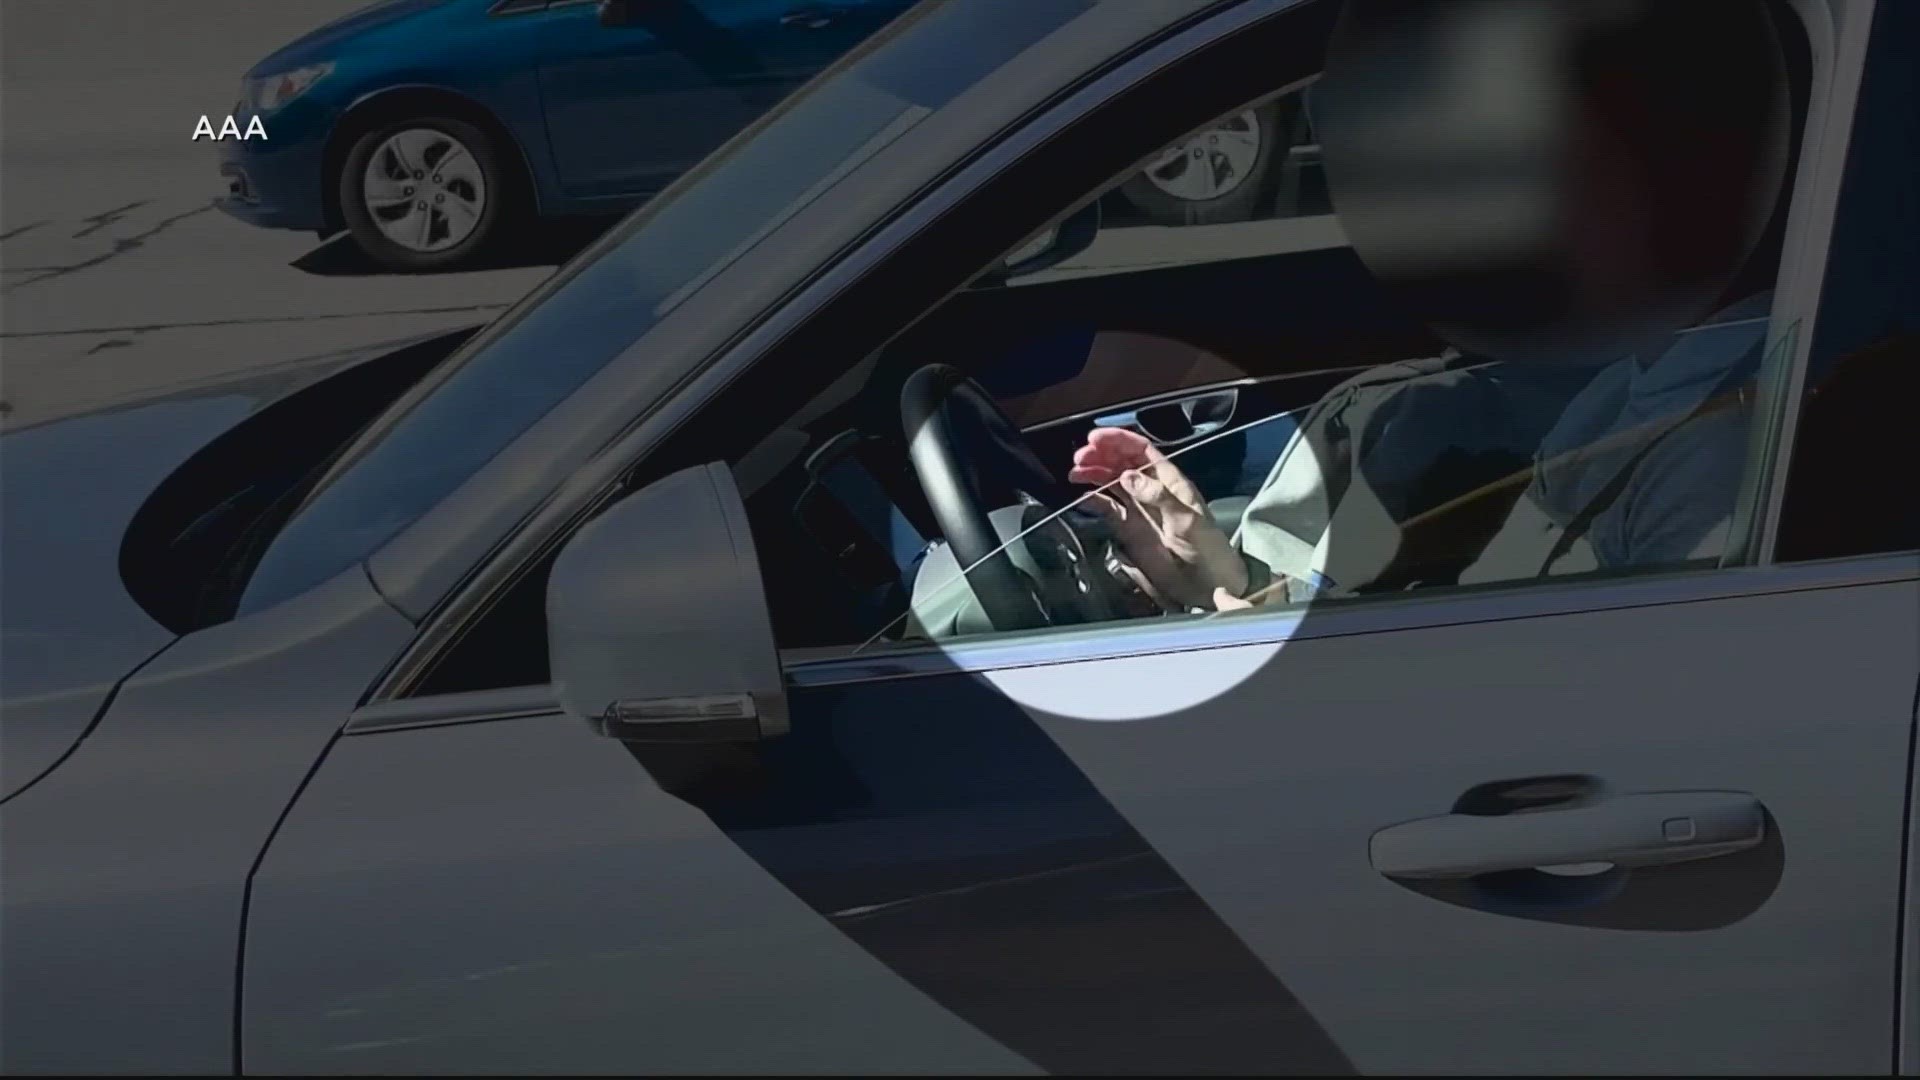 It's something police say they see too often, drivers focused on their phones.